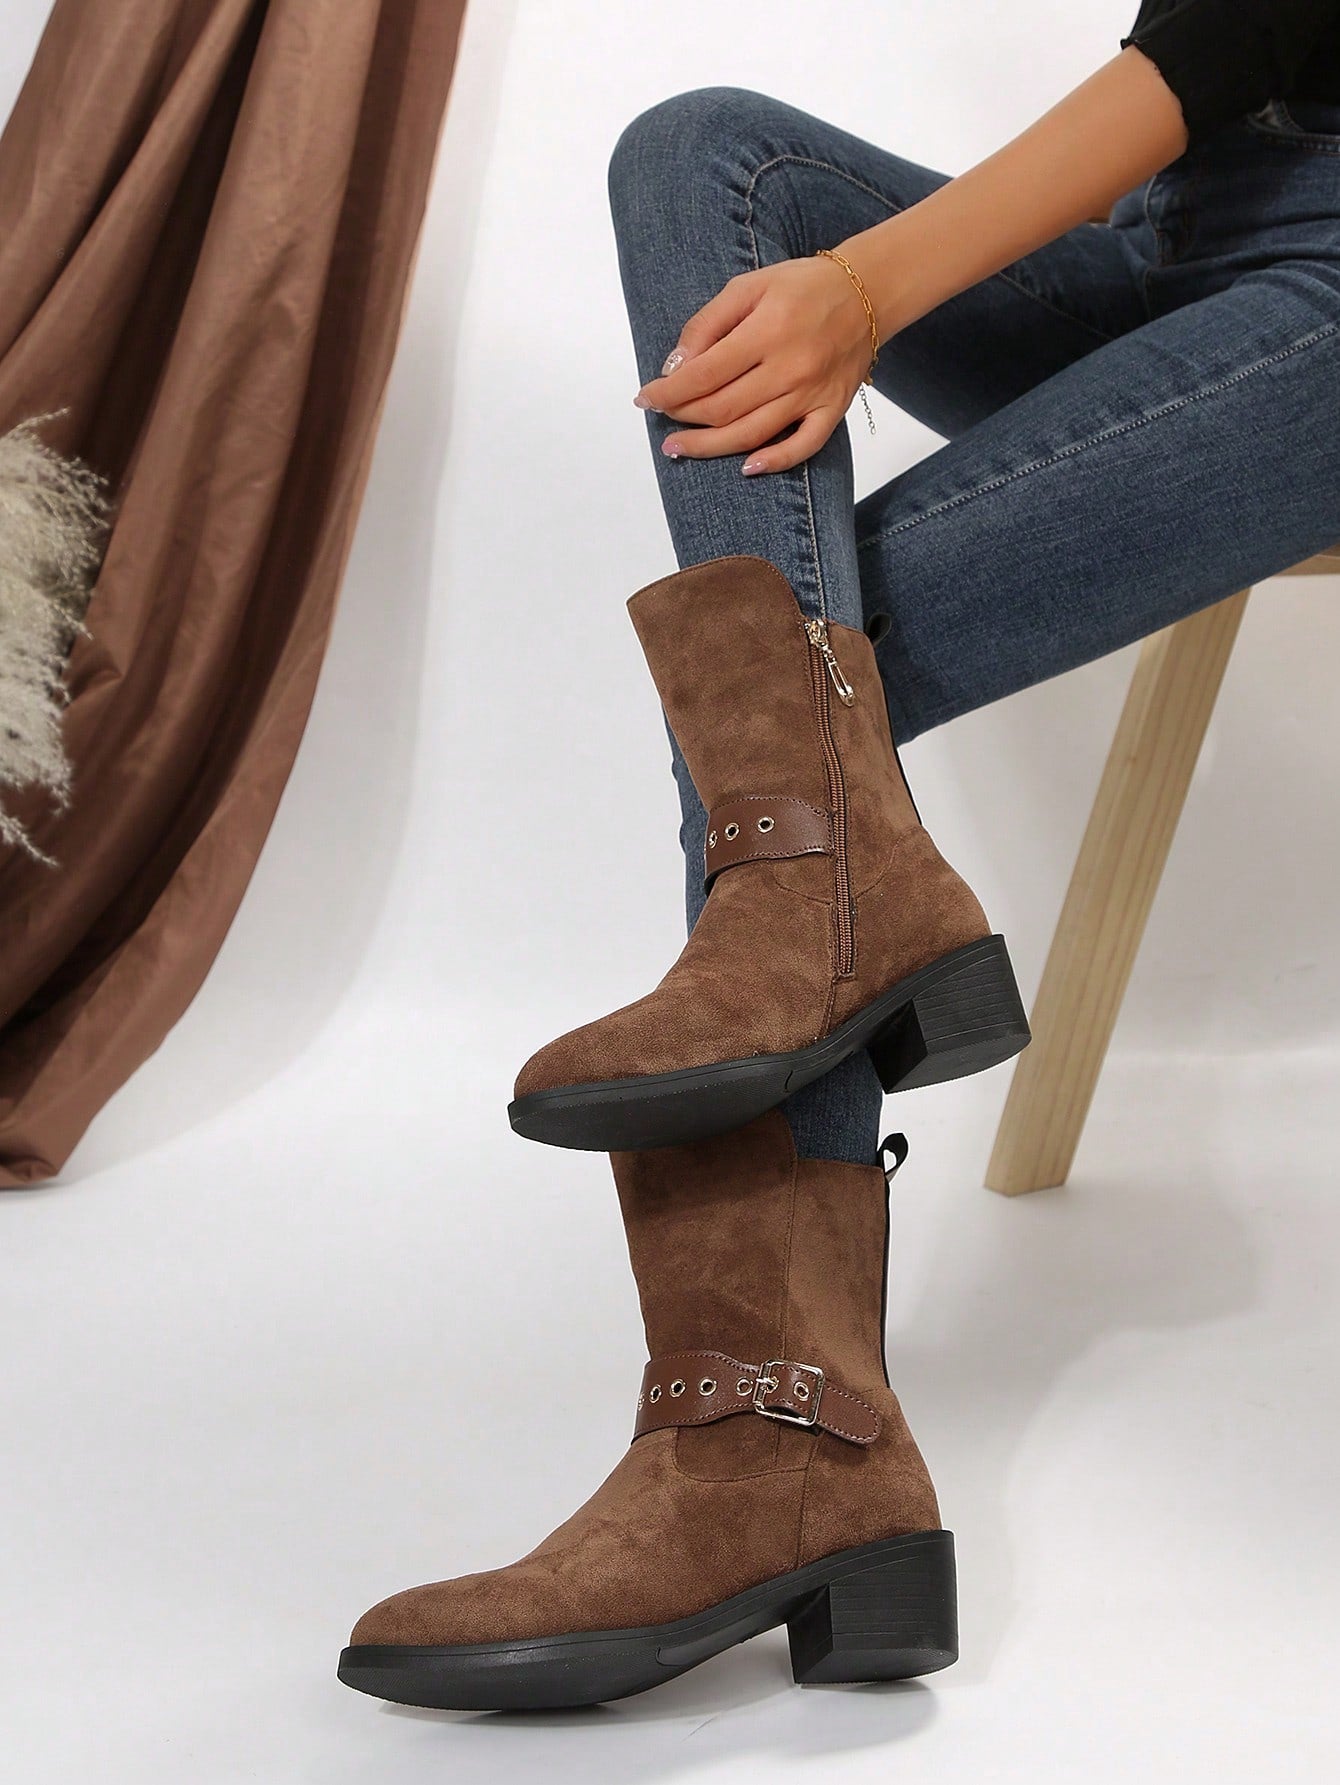 Chunky Heel Mid-calf Knight Boots For Women, New Vintage Suede Western Style Fashion Boots, Spring And Autumn-Brown-3